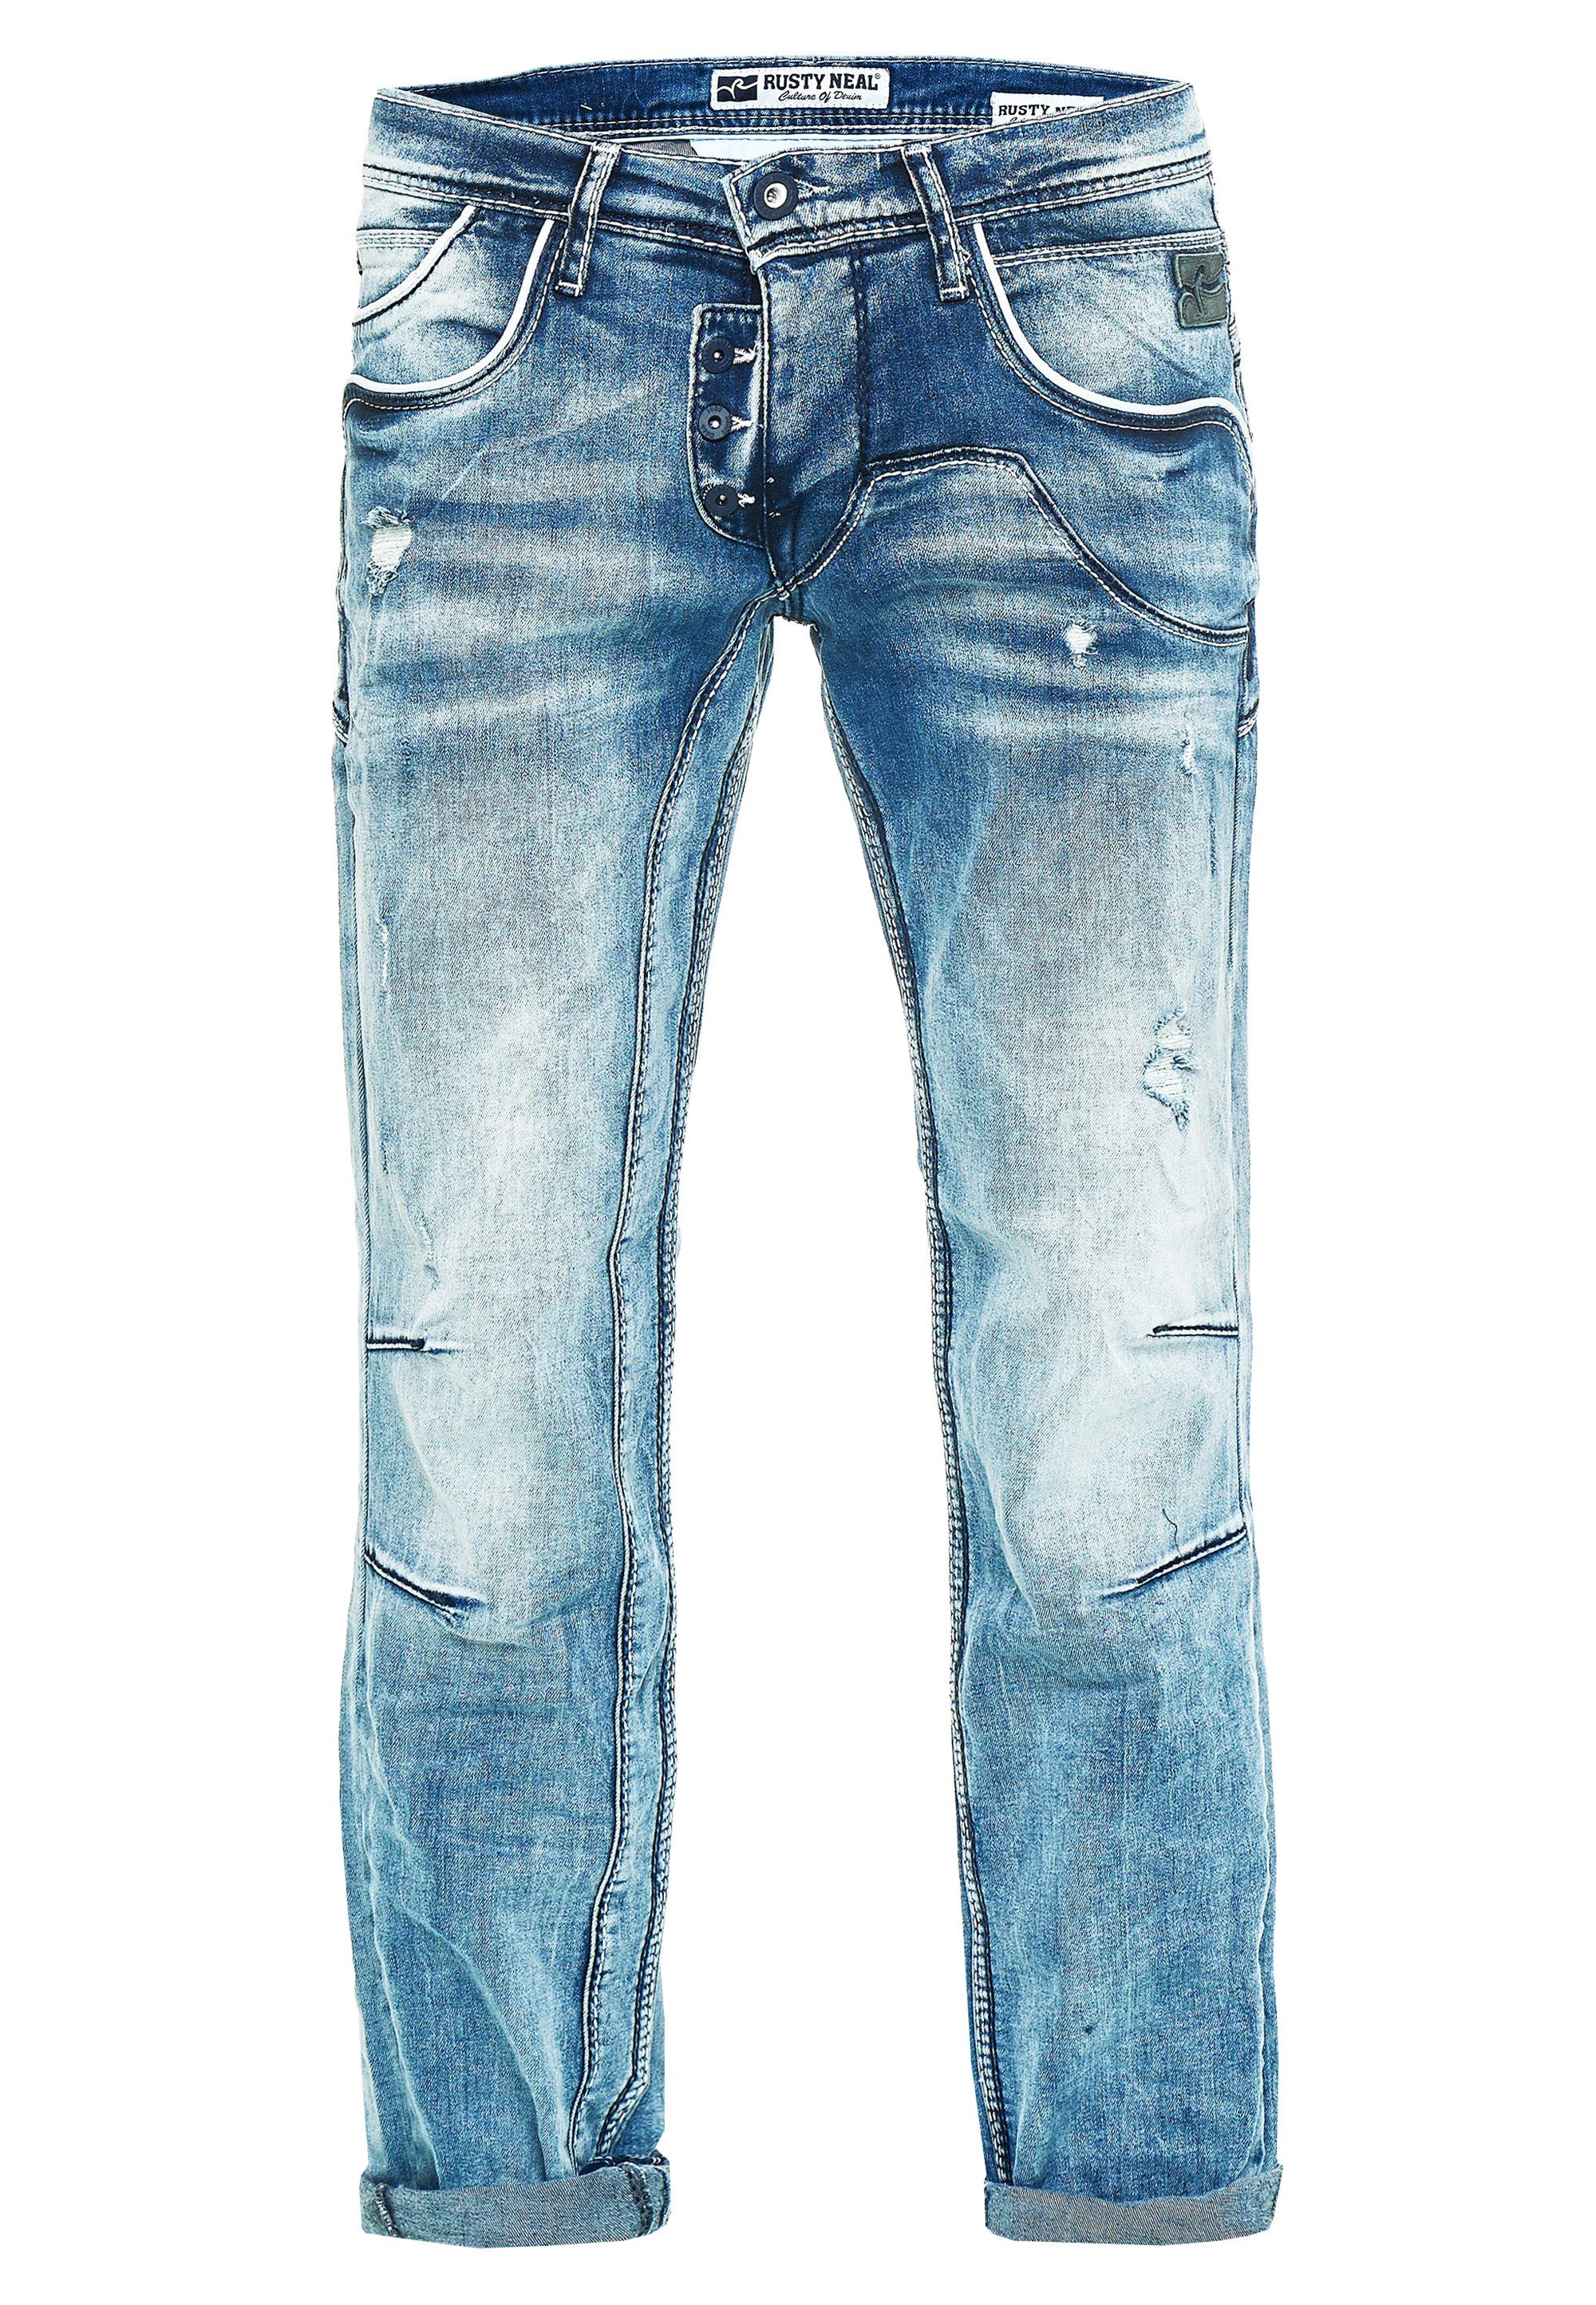 Jeans Rusty Waschung cooler Neal Bequeme mit